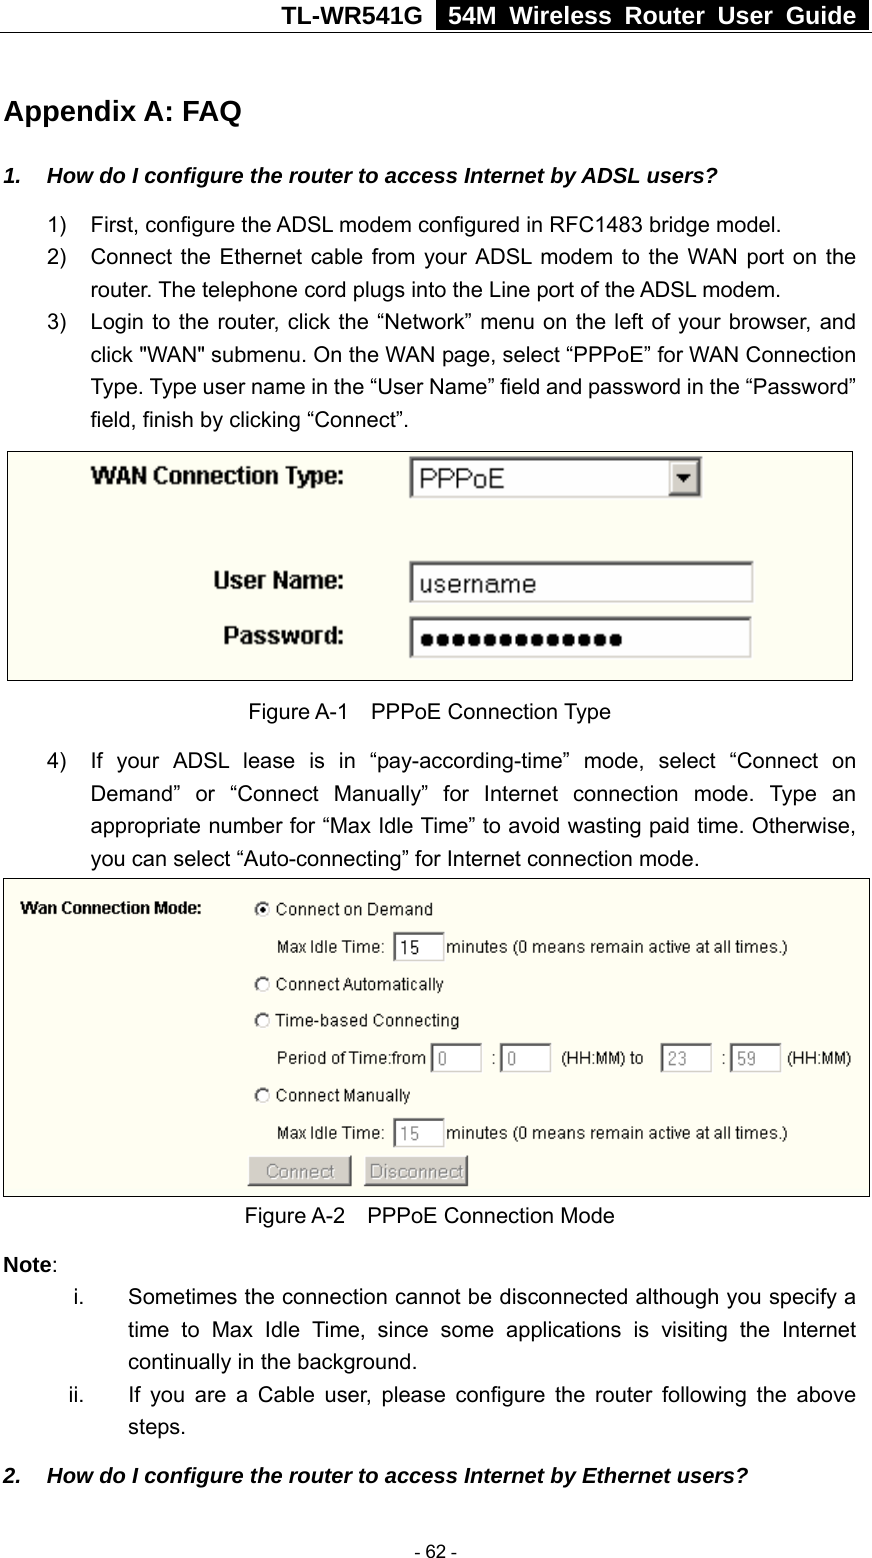 TL-WR541G   54M Wireless Router User Guide  Appendix A: FAQ 1.  How do I configure the router to access Internet by ADSL users? 1)  First, configure the ADSL modem configured in RFC1483 bridge model. 2)  Connect the Ethernet cable from your ADSL modem to the WAN port on the router. The telephone cord plugs into the Line port of the ADSL modem. 3)  Login to the router, click the “Network” menu on the left of your browser, and click &quot;WAN&quot; submenu. On the WAN page, select “PPPoE” for WAN Connection Type. Type user name in the “User Name” field and password in the “Password” field, finish by clicking “Connect”.  Figure A-1  PPPoE Connection Type 4)  If your ADSL lease is in “pay-according-time” mode, select “Connect on Demand” or “Connect Manually” for Internet connection mode. Type an appropriate number for “Max Idle Time” to avoid wasting paid time. Otherwise, you can select “Auto-connecting” for Internet connection mode.  Figure A-2  PPPoE Connection Mode Note:  i.  Sometimes the connection cannot be disconnected although you specify a time to Max Idle Time, since some applications is visiting the Internet continually in the background. ii.  If you are a Cable user, please configure the router following the above steps. 2.  How do I configure the router to access Internet by Ethernet users?  - 62 - 